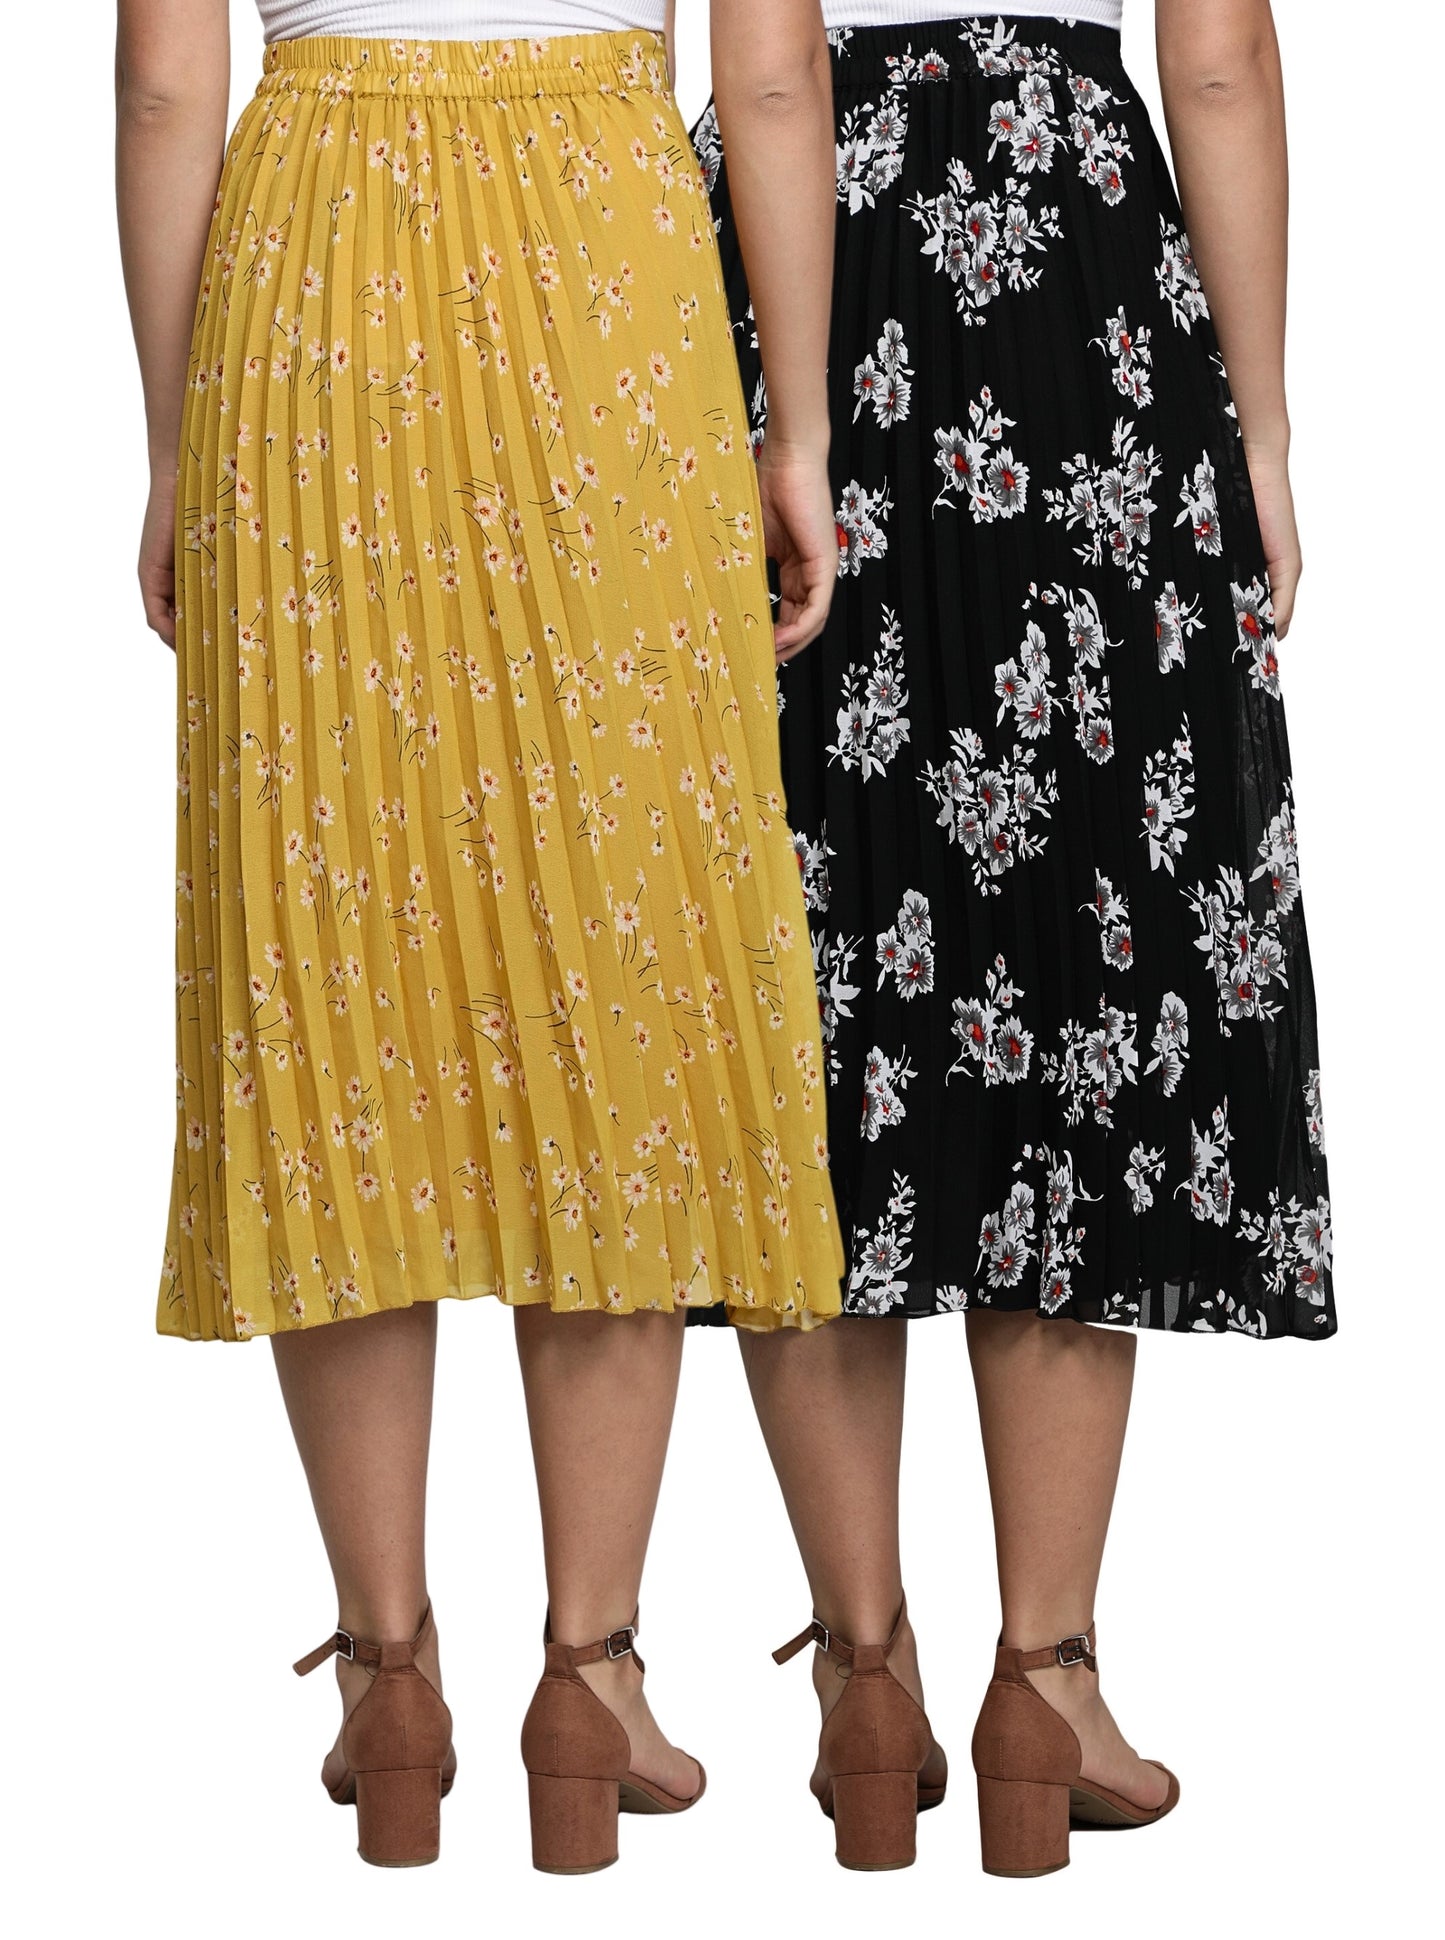 NUEVOSDAMAS Women Georgette Floral Printed Skirts - Pack of Two - Yellow and Black